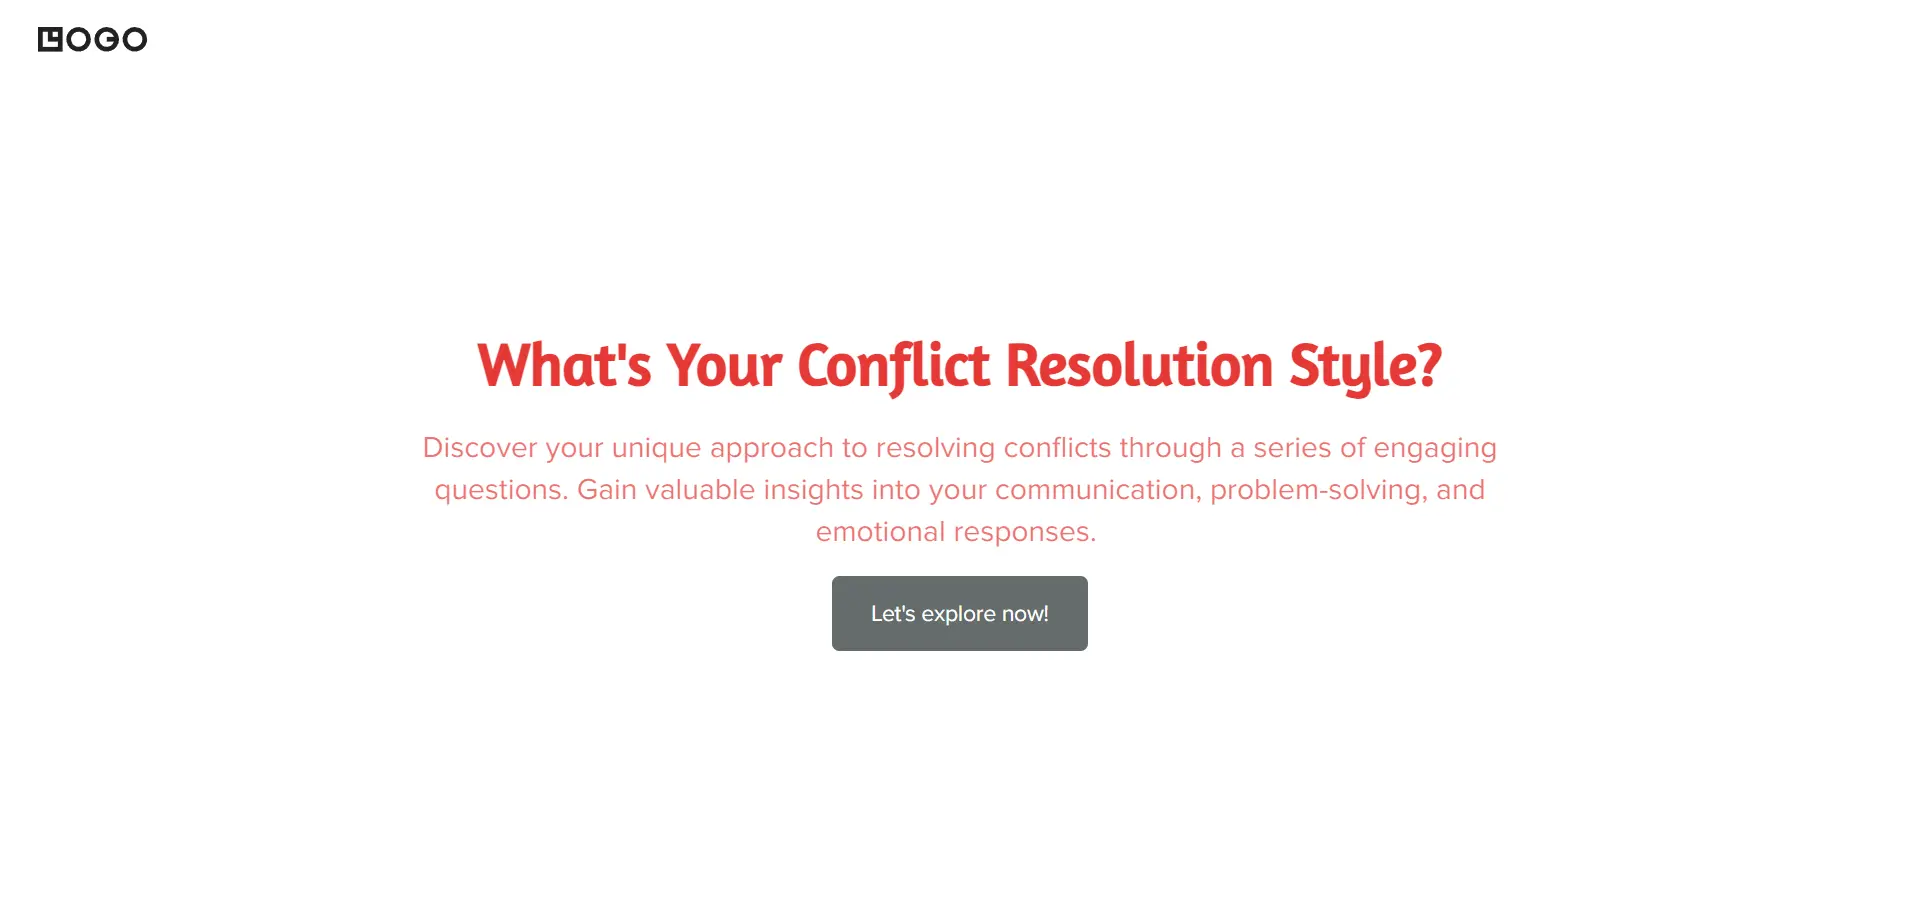 Whats Your Conflict Resolution Style